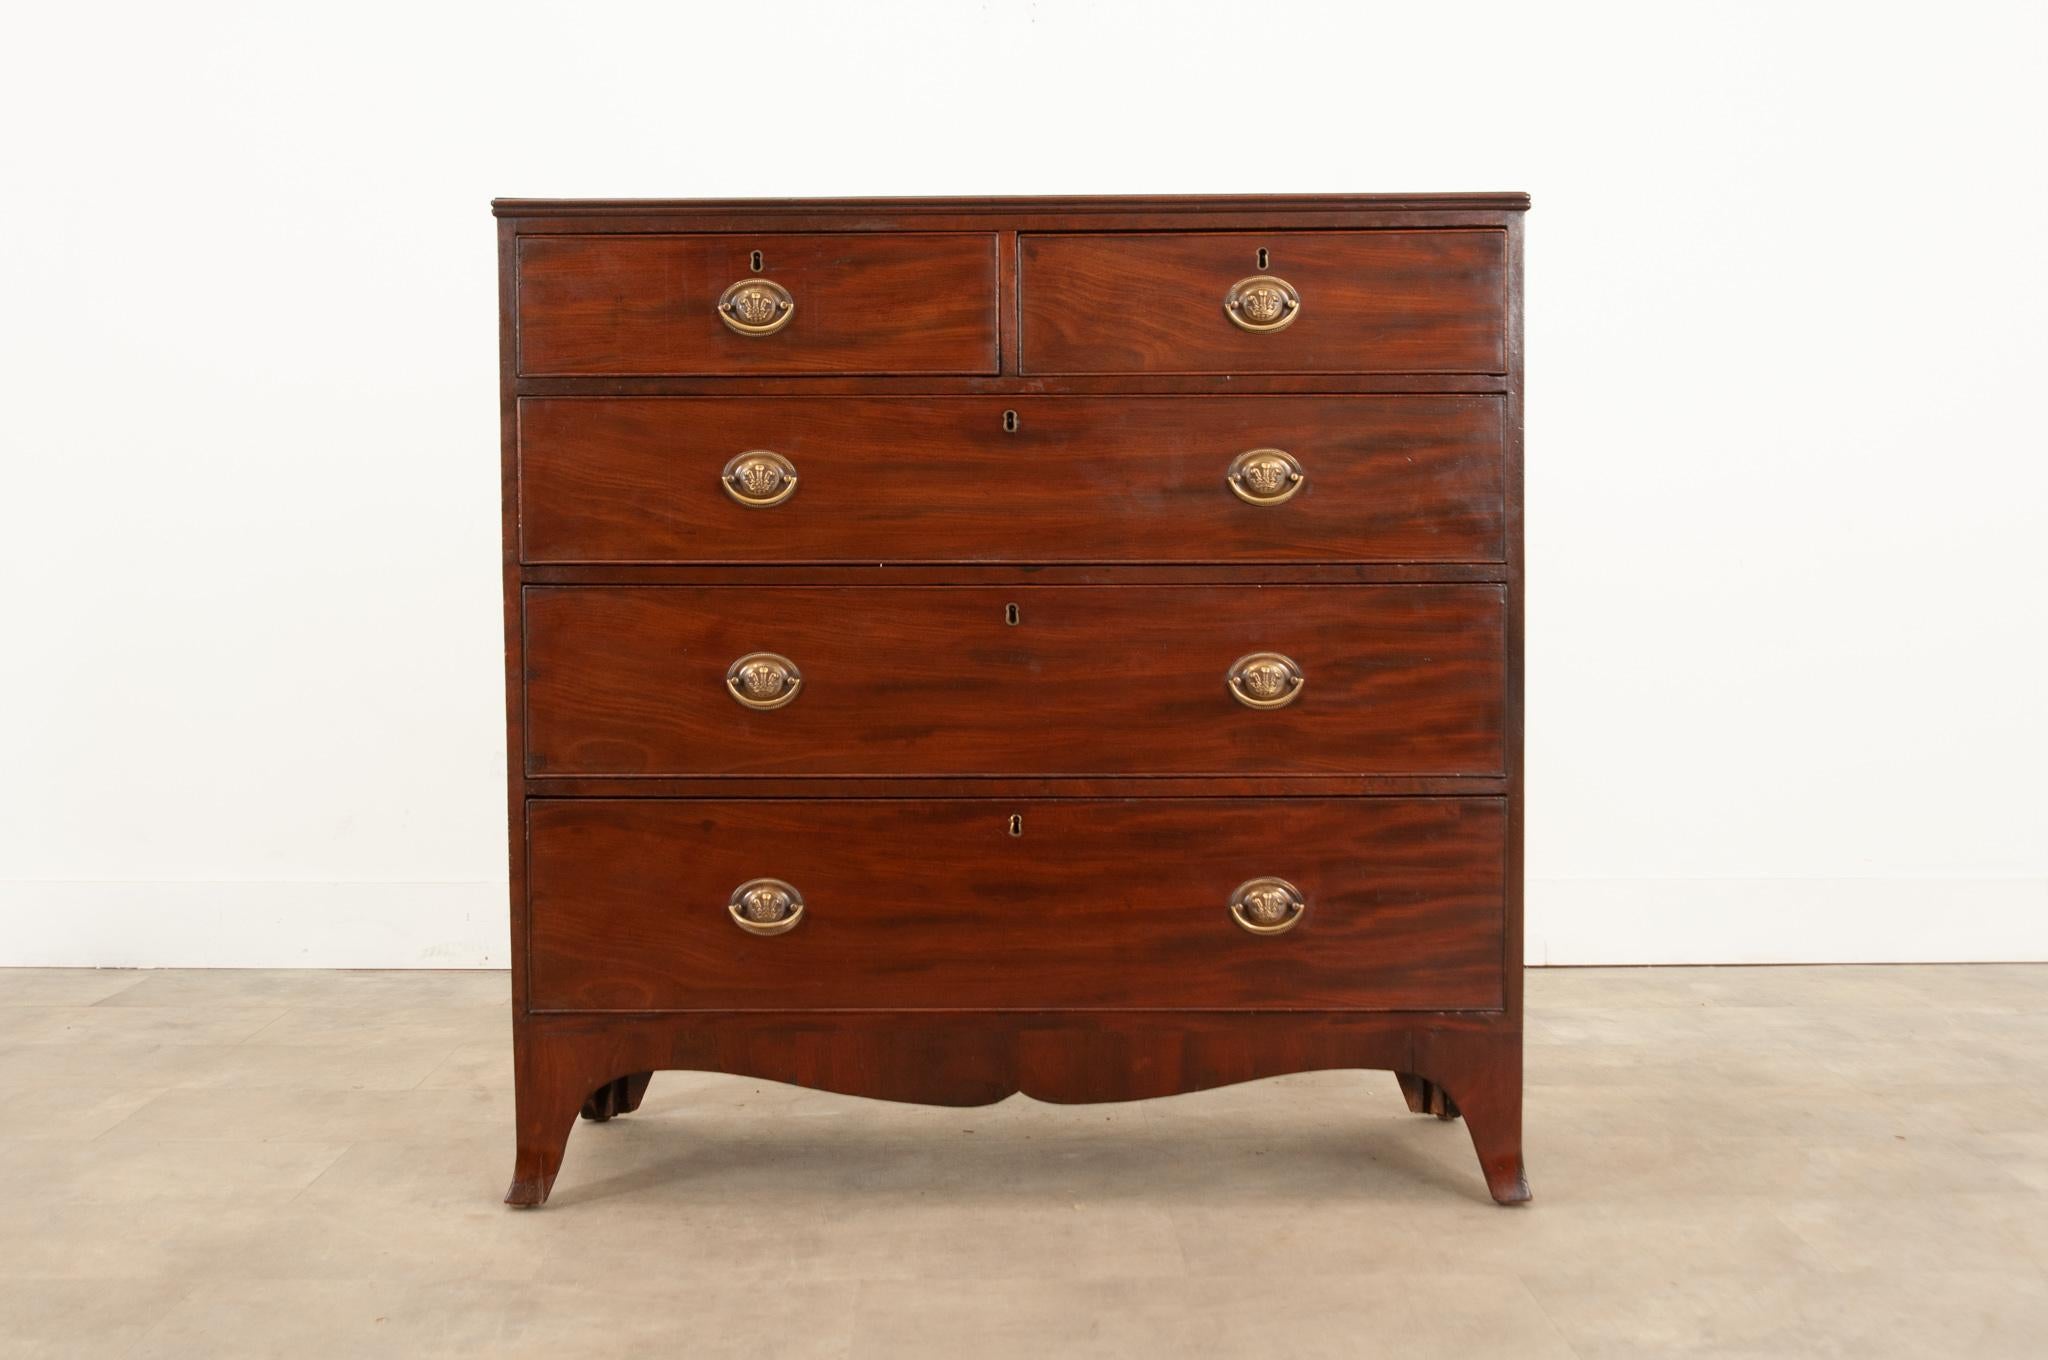 A stunning mahogany chest of drawers, made in early 19th century England, circa 1820. This five drawer case antique is made in the Georgian style and features a linear composition with extraordinarily clean lines and a polished, finished presence.